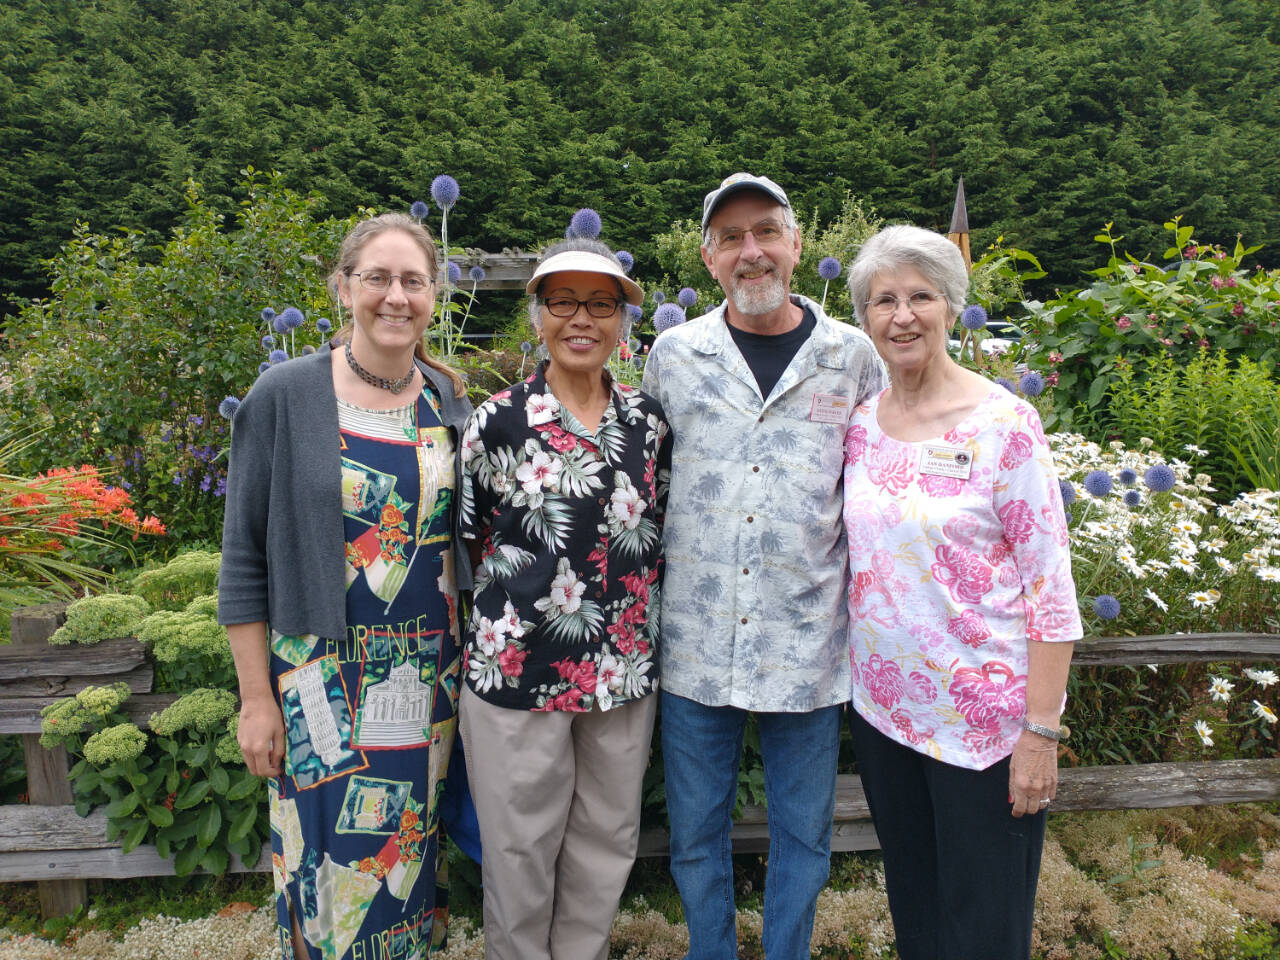 Submitted photo / Clallam County Master Gardeners Laurel Moulton, Audreen Williams, Keith Dekker and Jan Danford will answer gardening questions from 10:30 a.m.-noon on Saturday, Sept. 17, at the Master Gardener Demonstration Garden at 2711 Woodcock Road in Sequim. The presentation is free and open to the public.